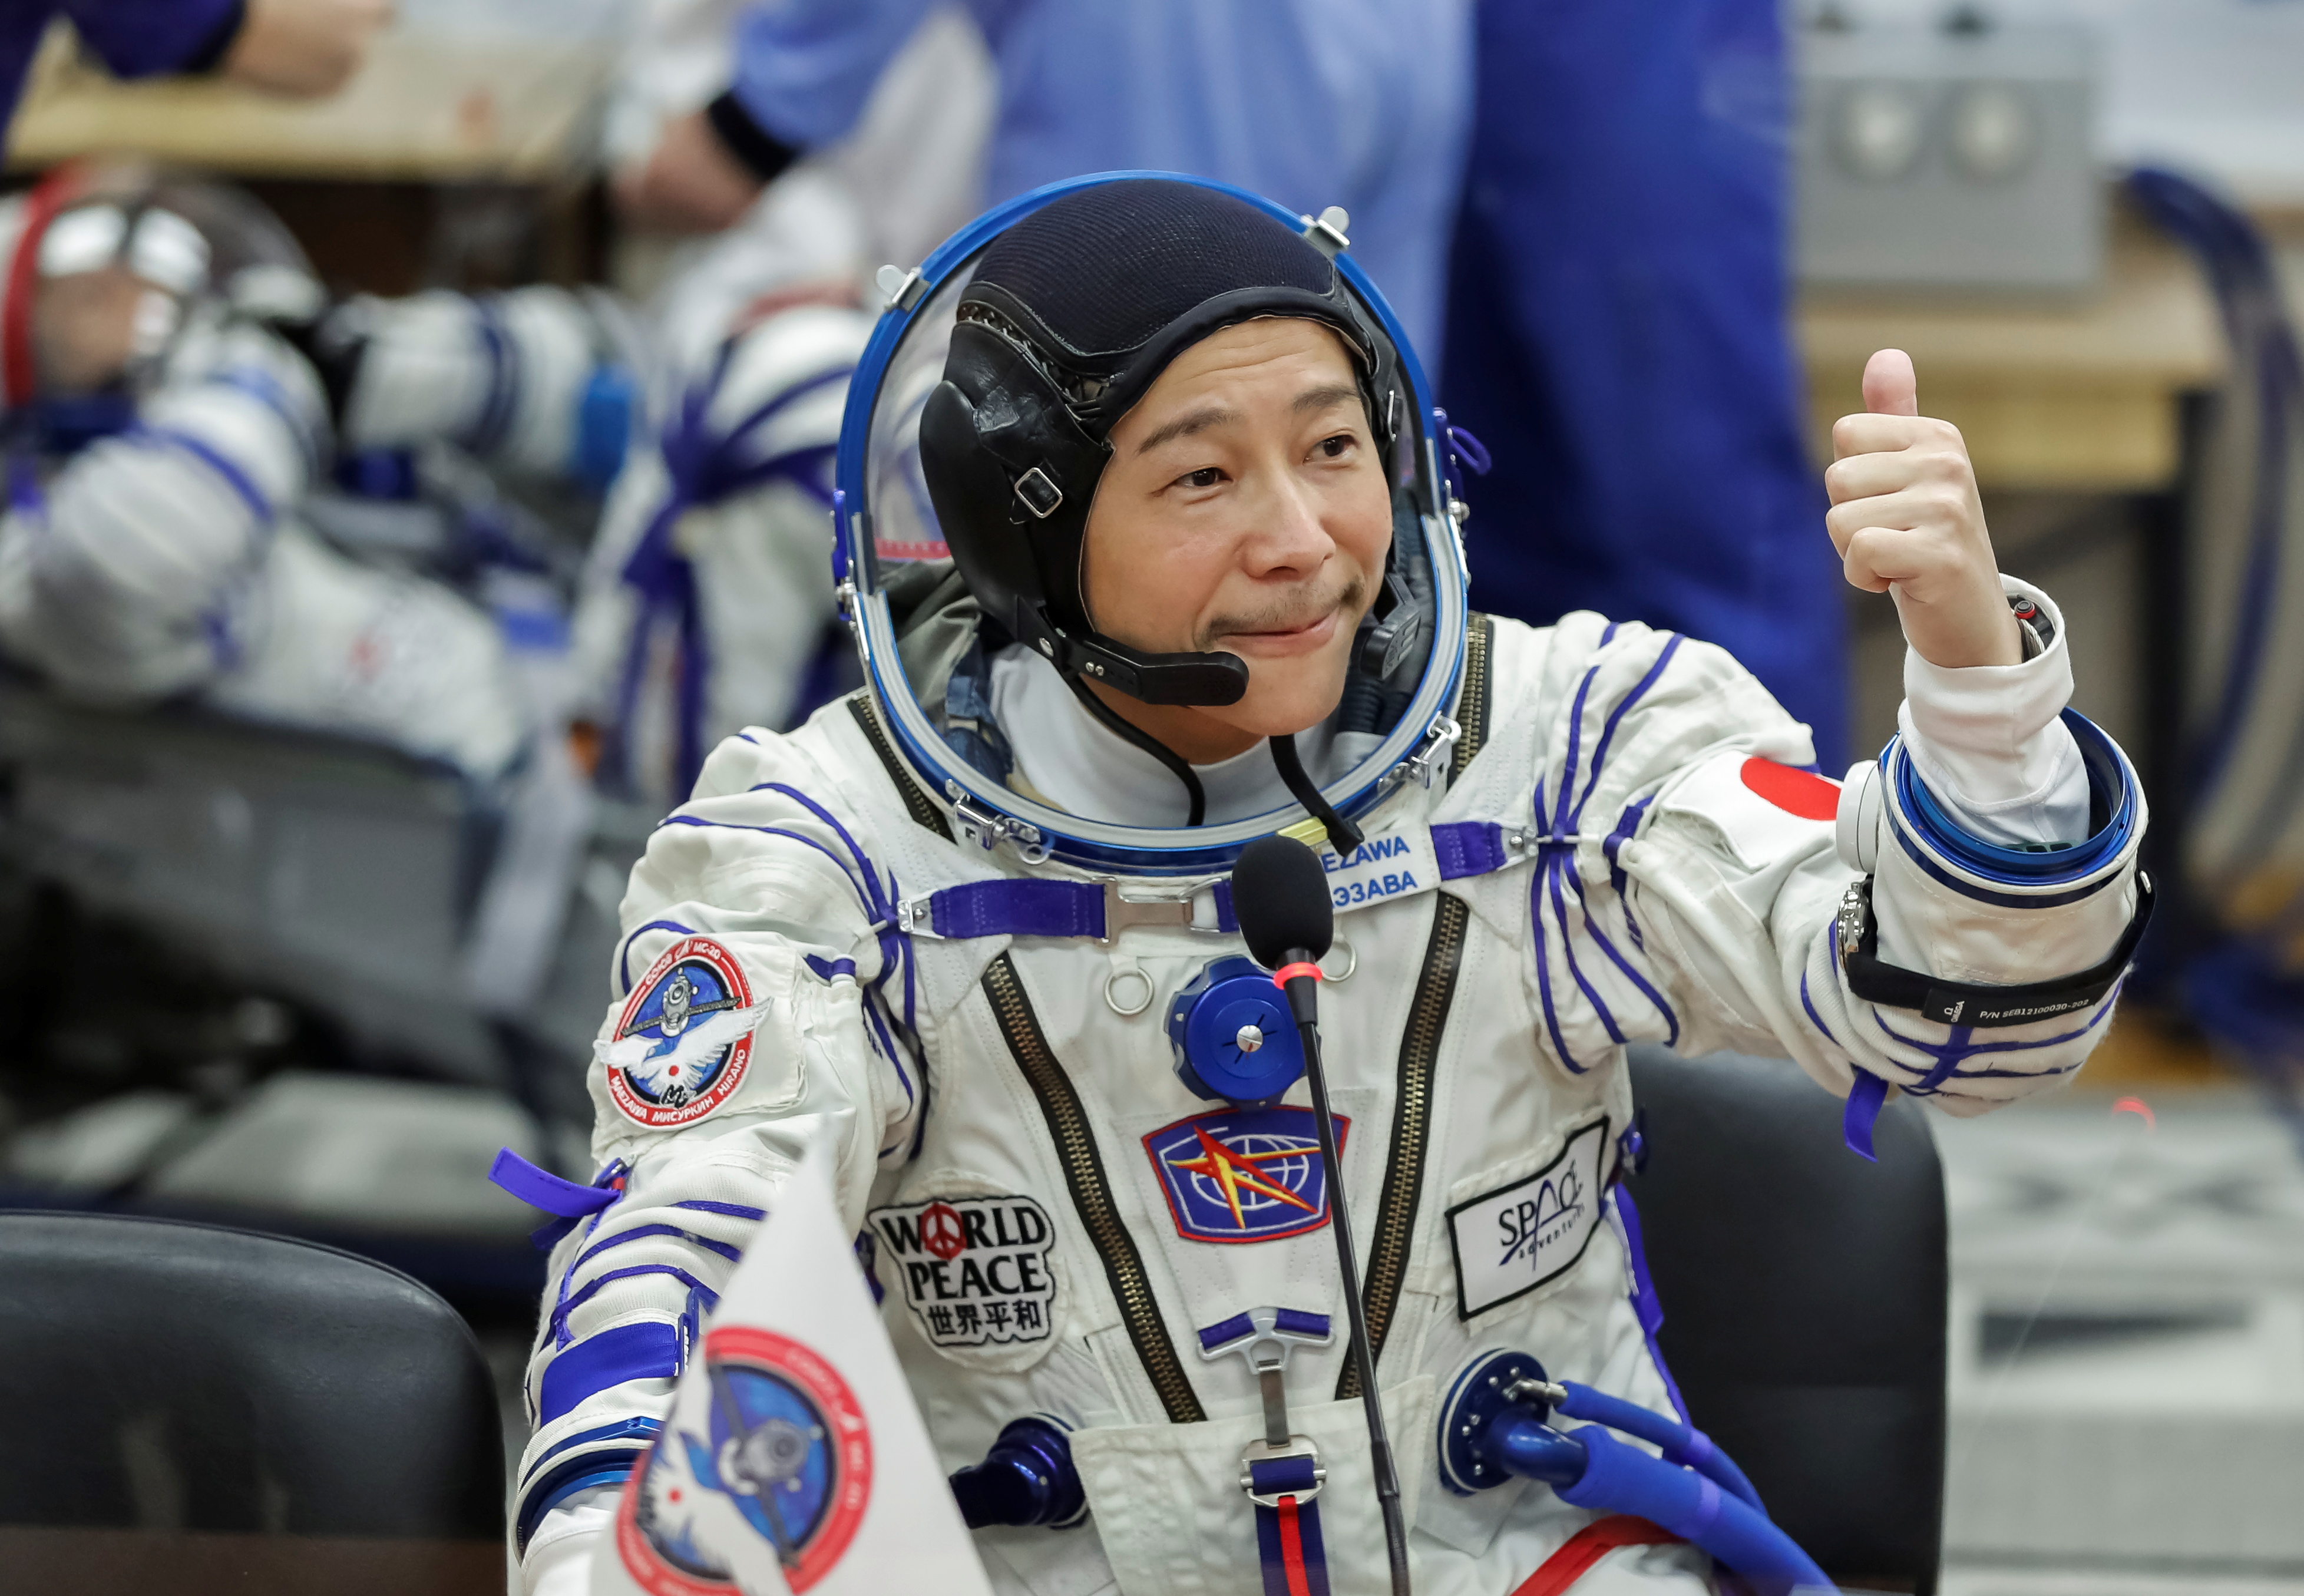 Japanese entrepreneur Yusaku Maezawa reacts as he talks to his family after donning his space suits shortly before launching to the International Space Station (ISS) at the Baikonur Cosmodrome